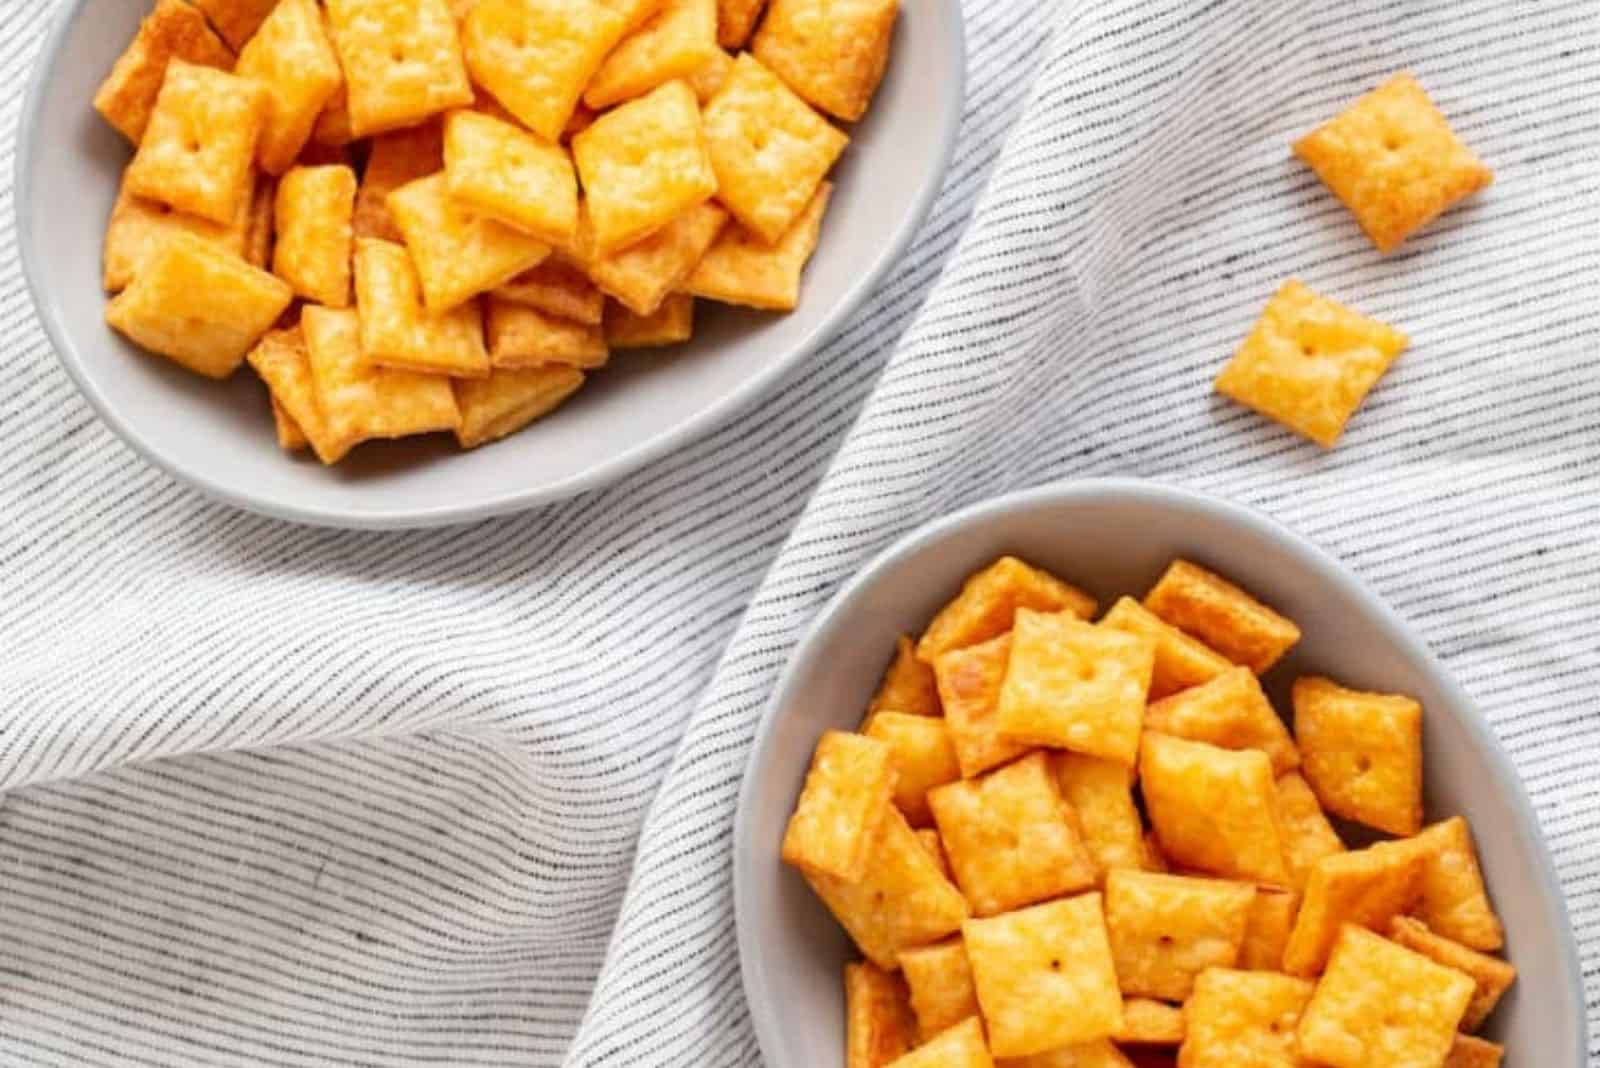 Cheez-Its in white bowls on a white tablecloth